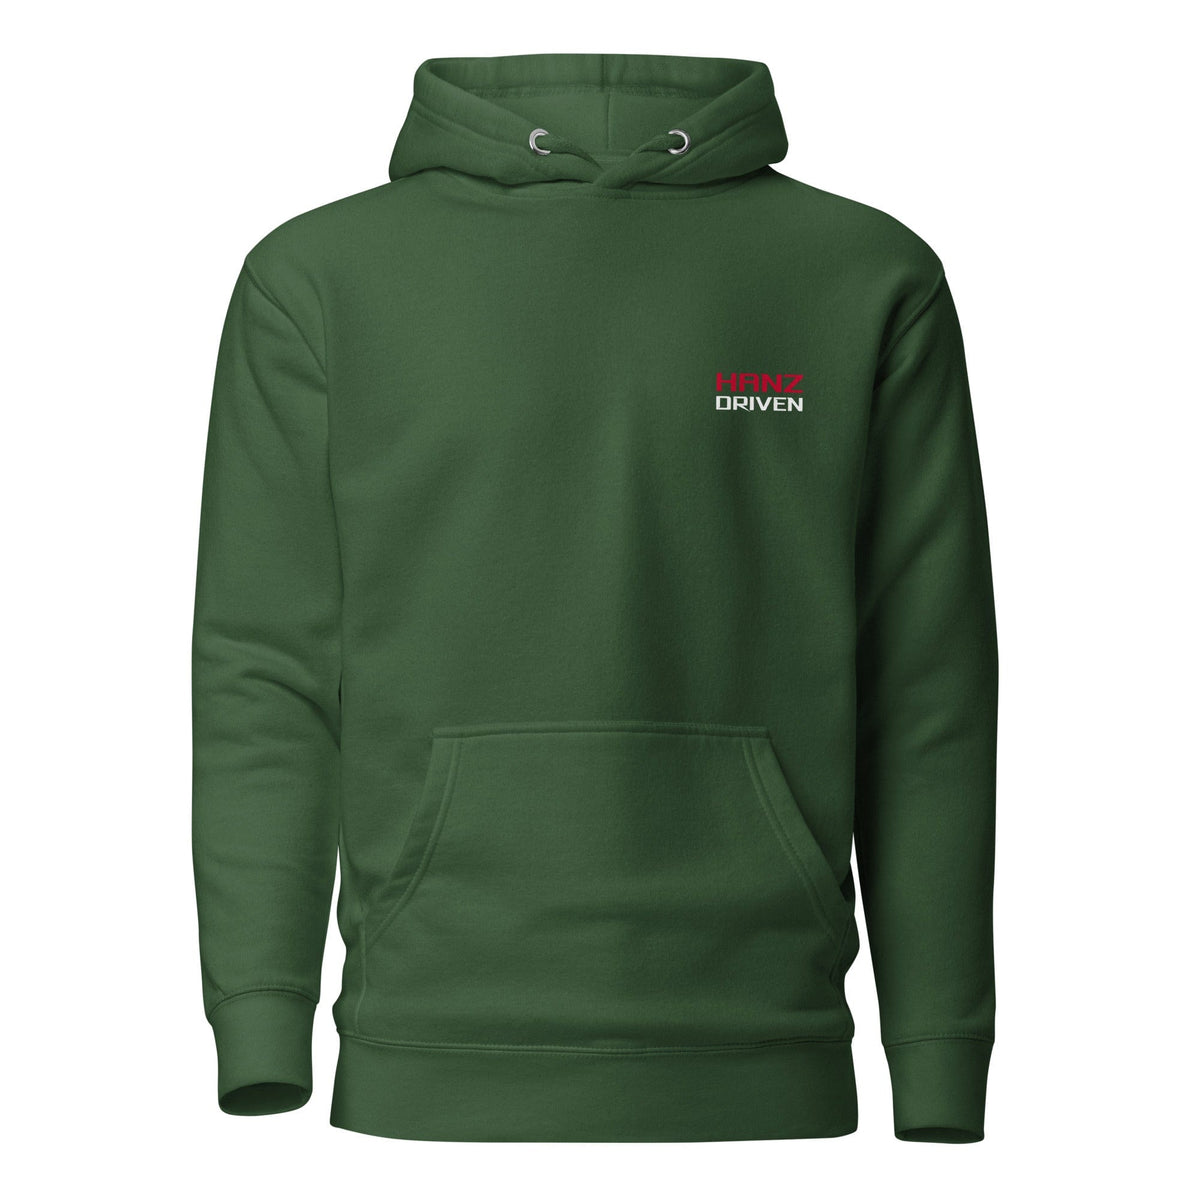 Size Matters Hoodie - 1/64 Life green diecast collector